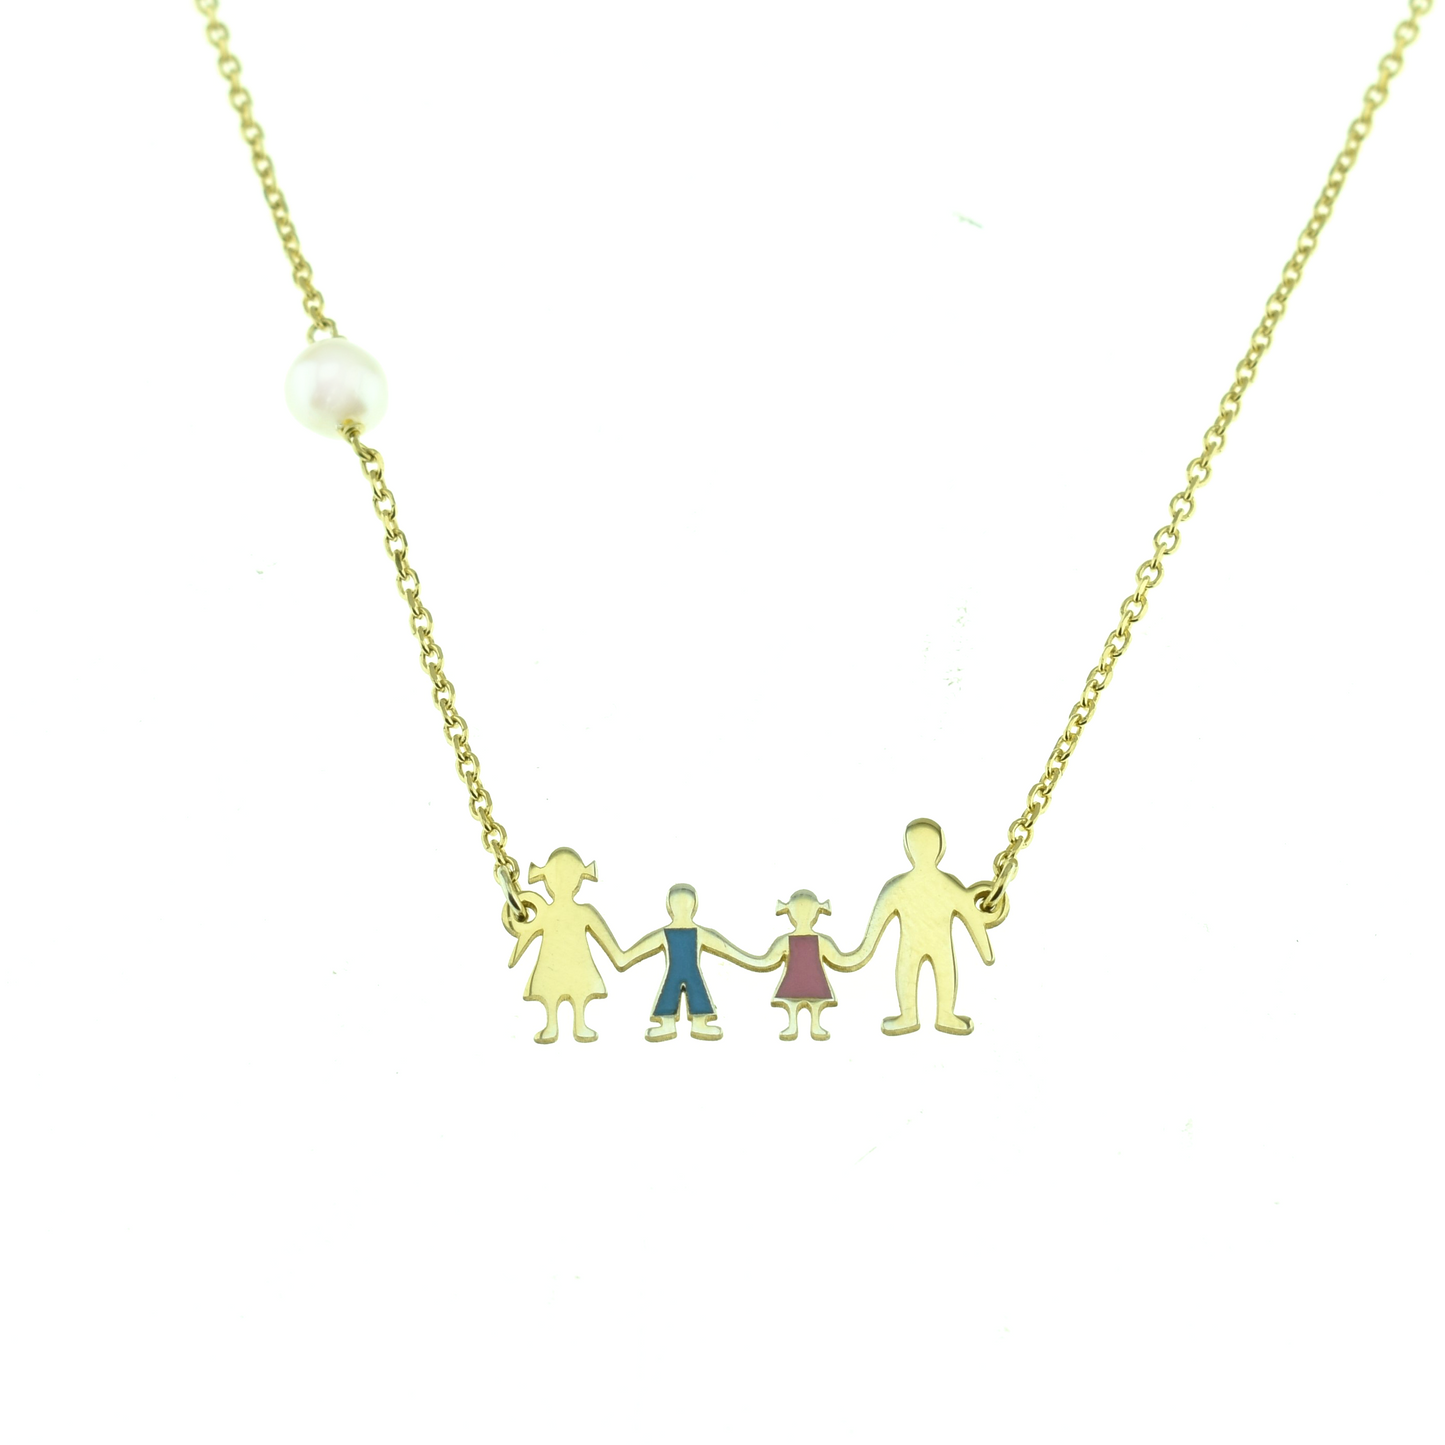 Silver 925 Family Necklace